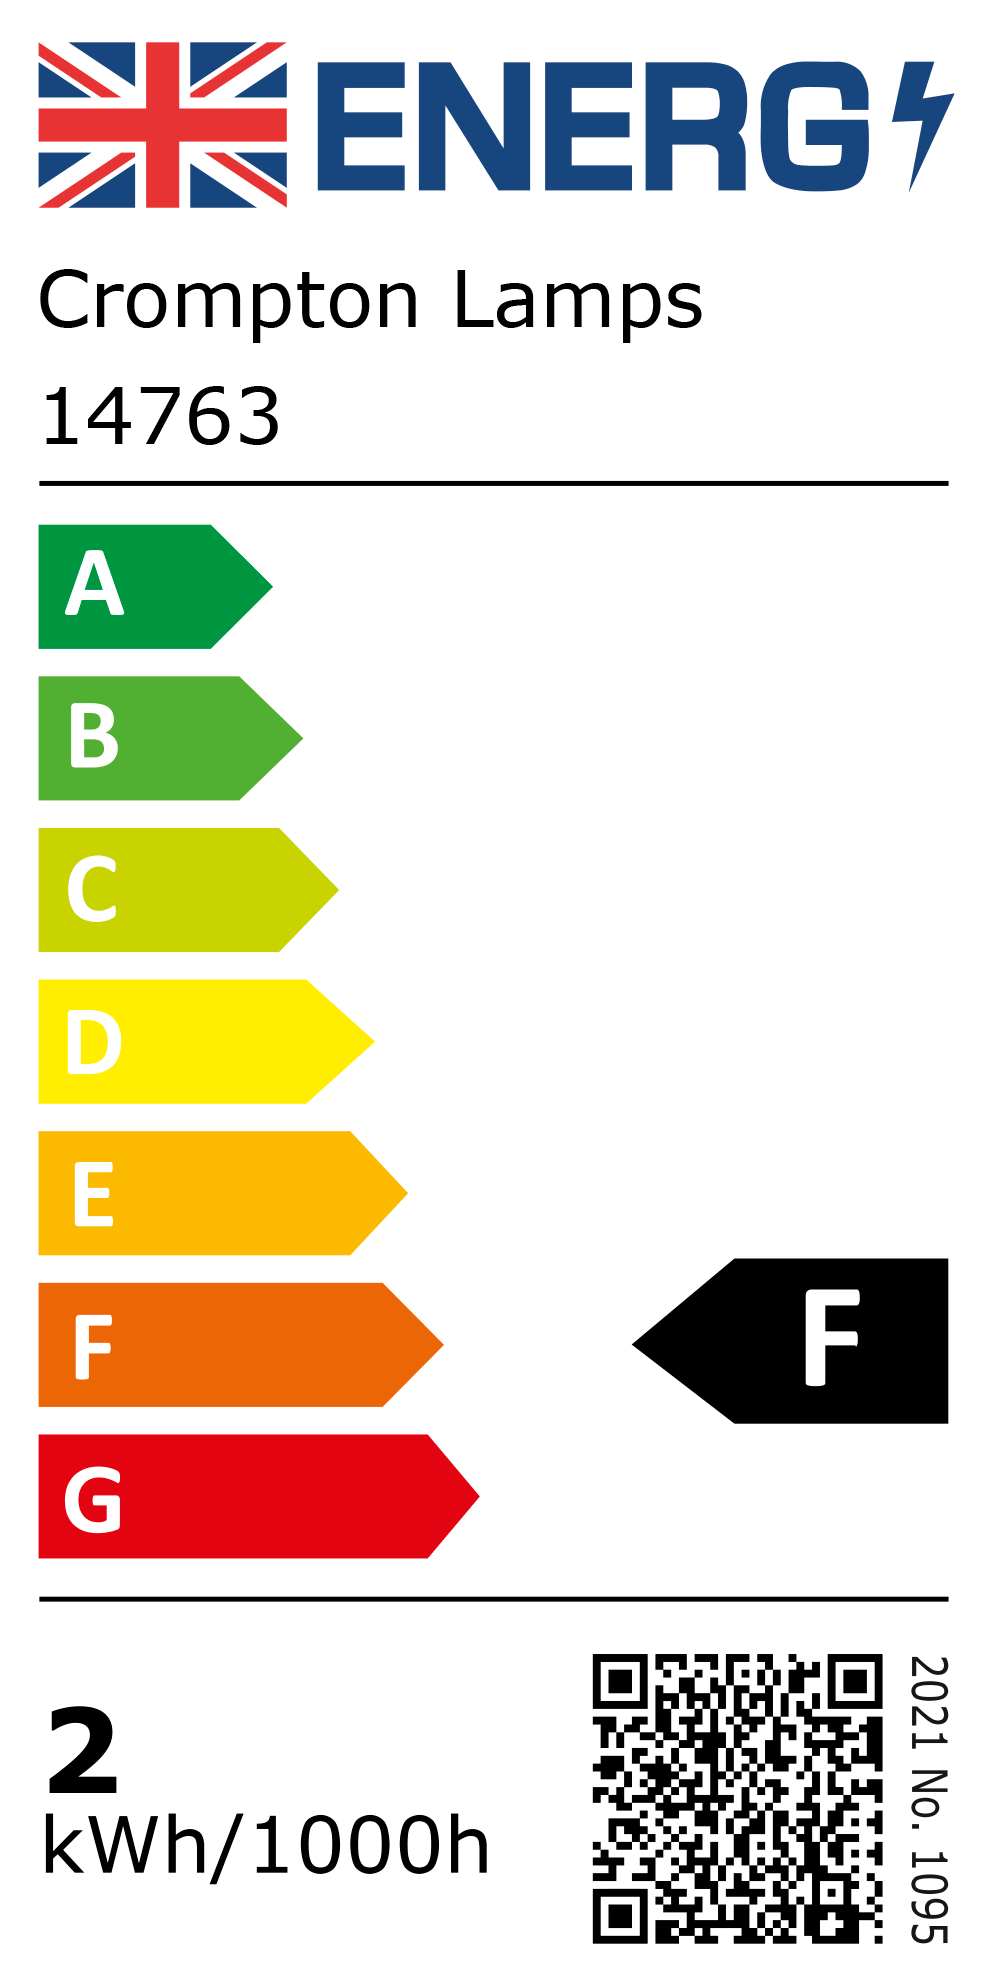 New 2021 Energy Rating Label: Stock Code 14763